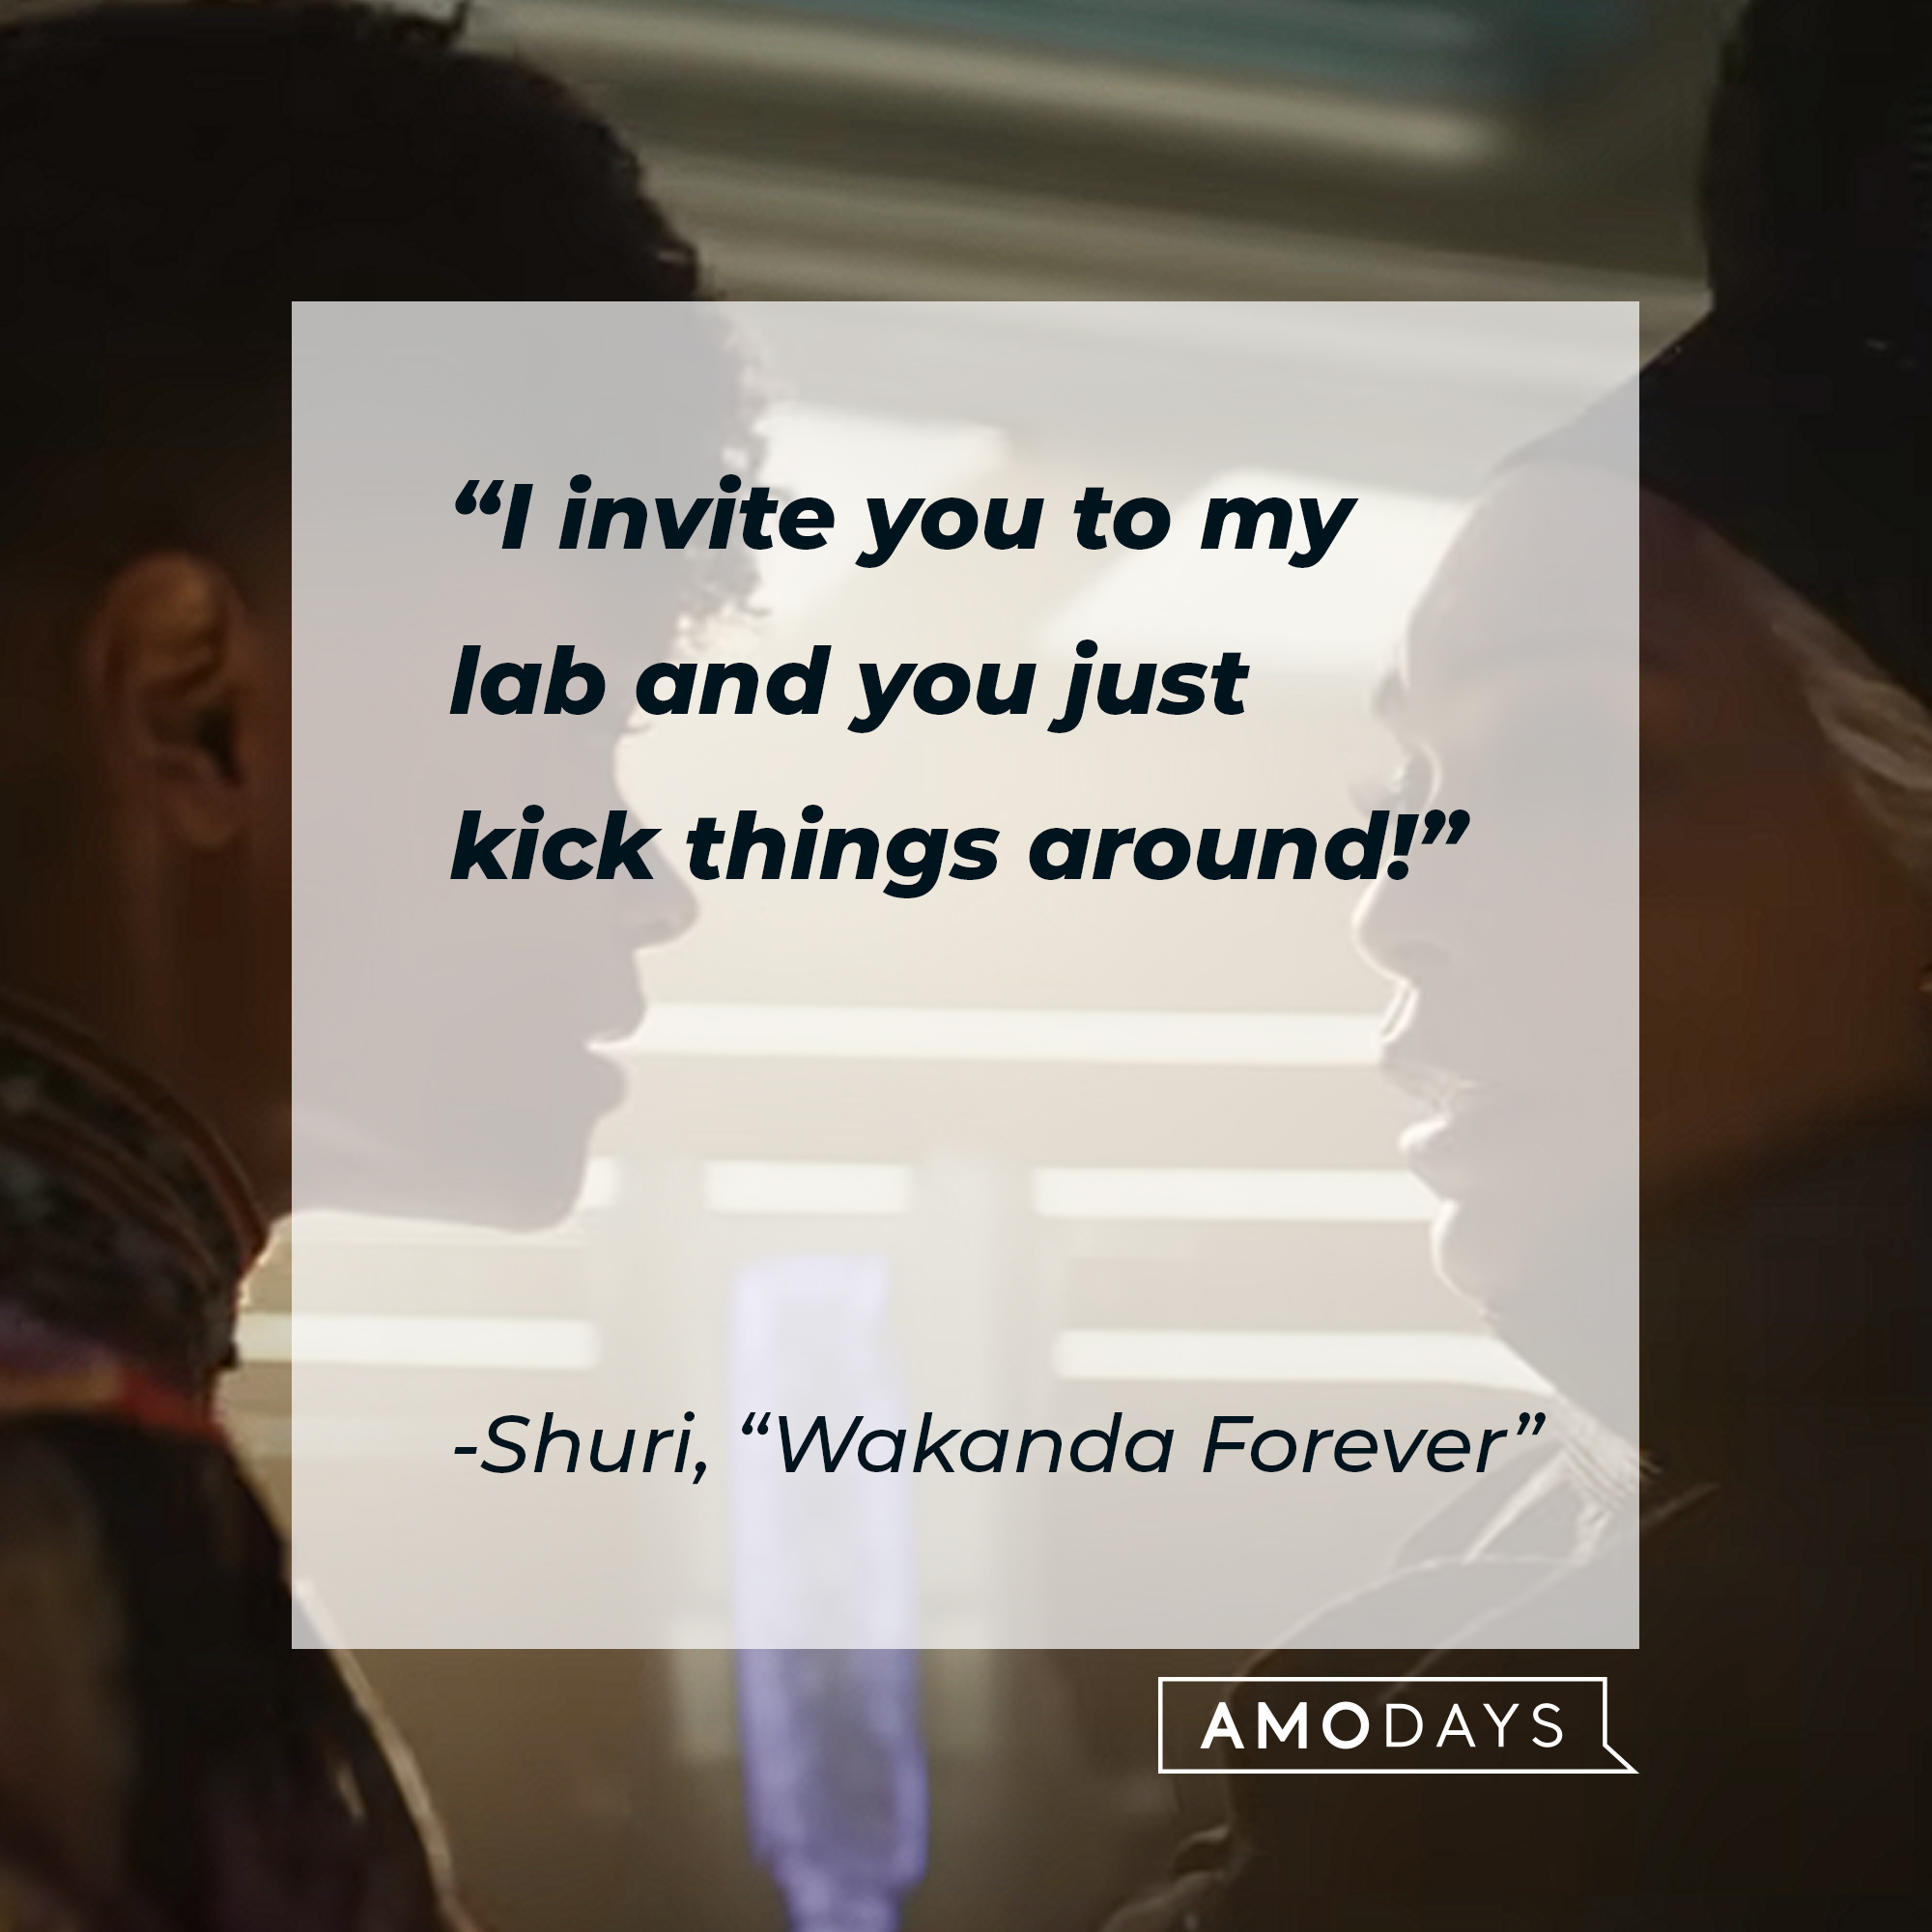 Shuri's quote from "Wakanda Forever:" “I invite you to my lab and you just kick things around!” | Source: Youtube.com/marvel